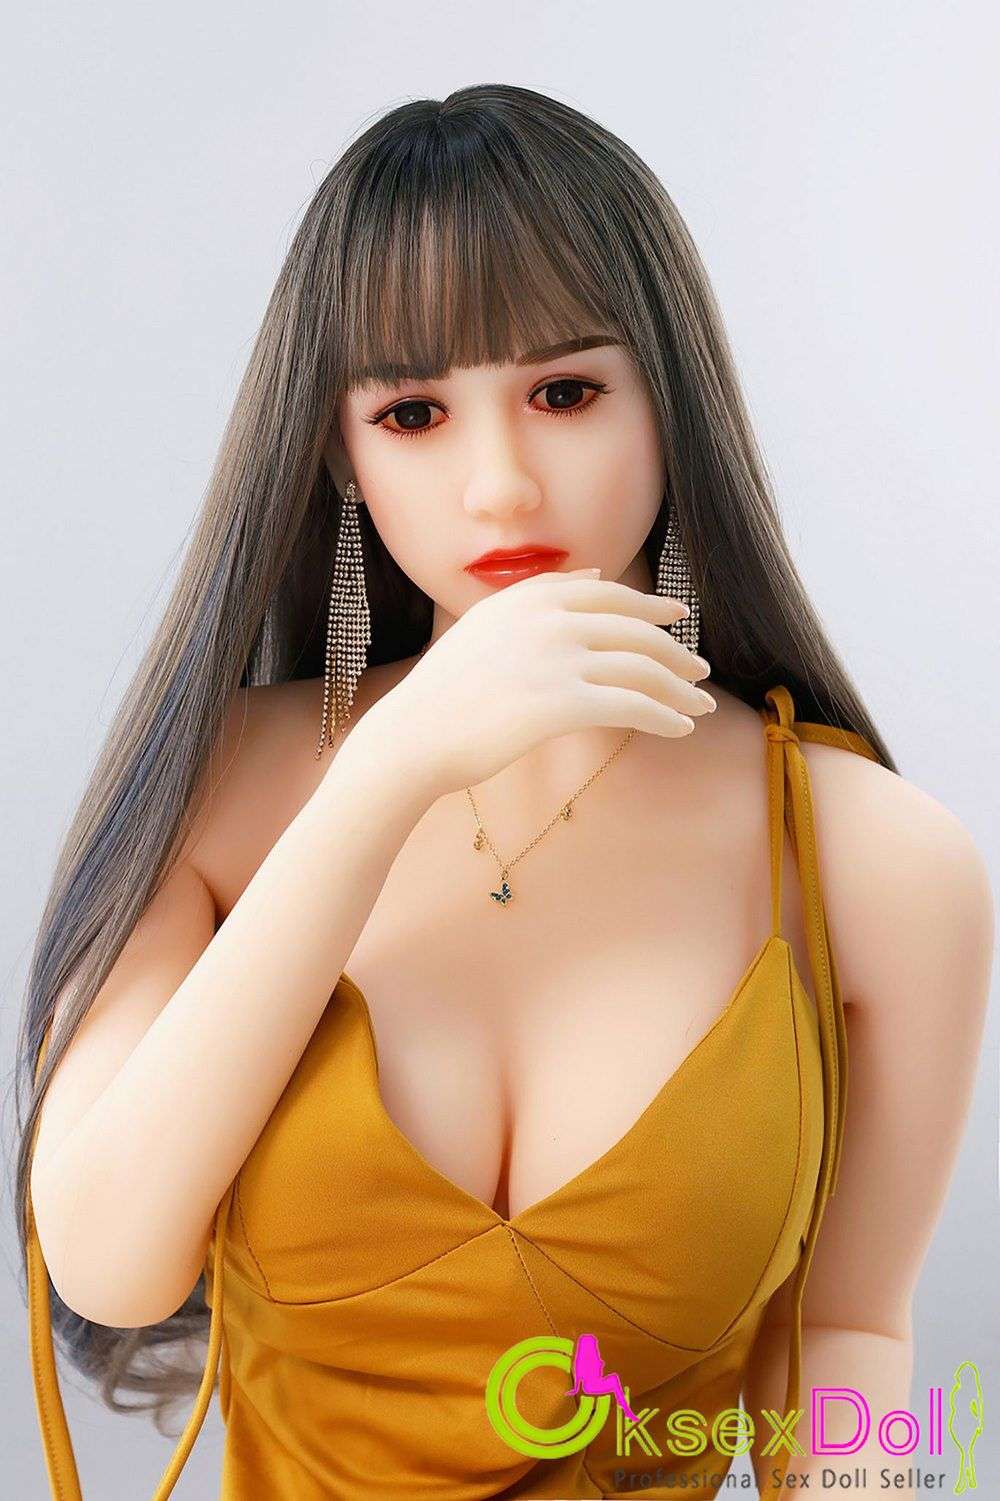 OkSexDoll E-cup Dolls Pictures